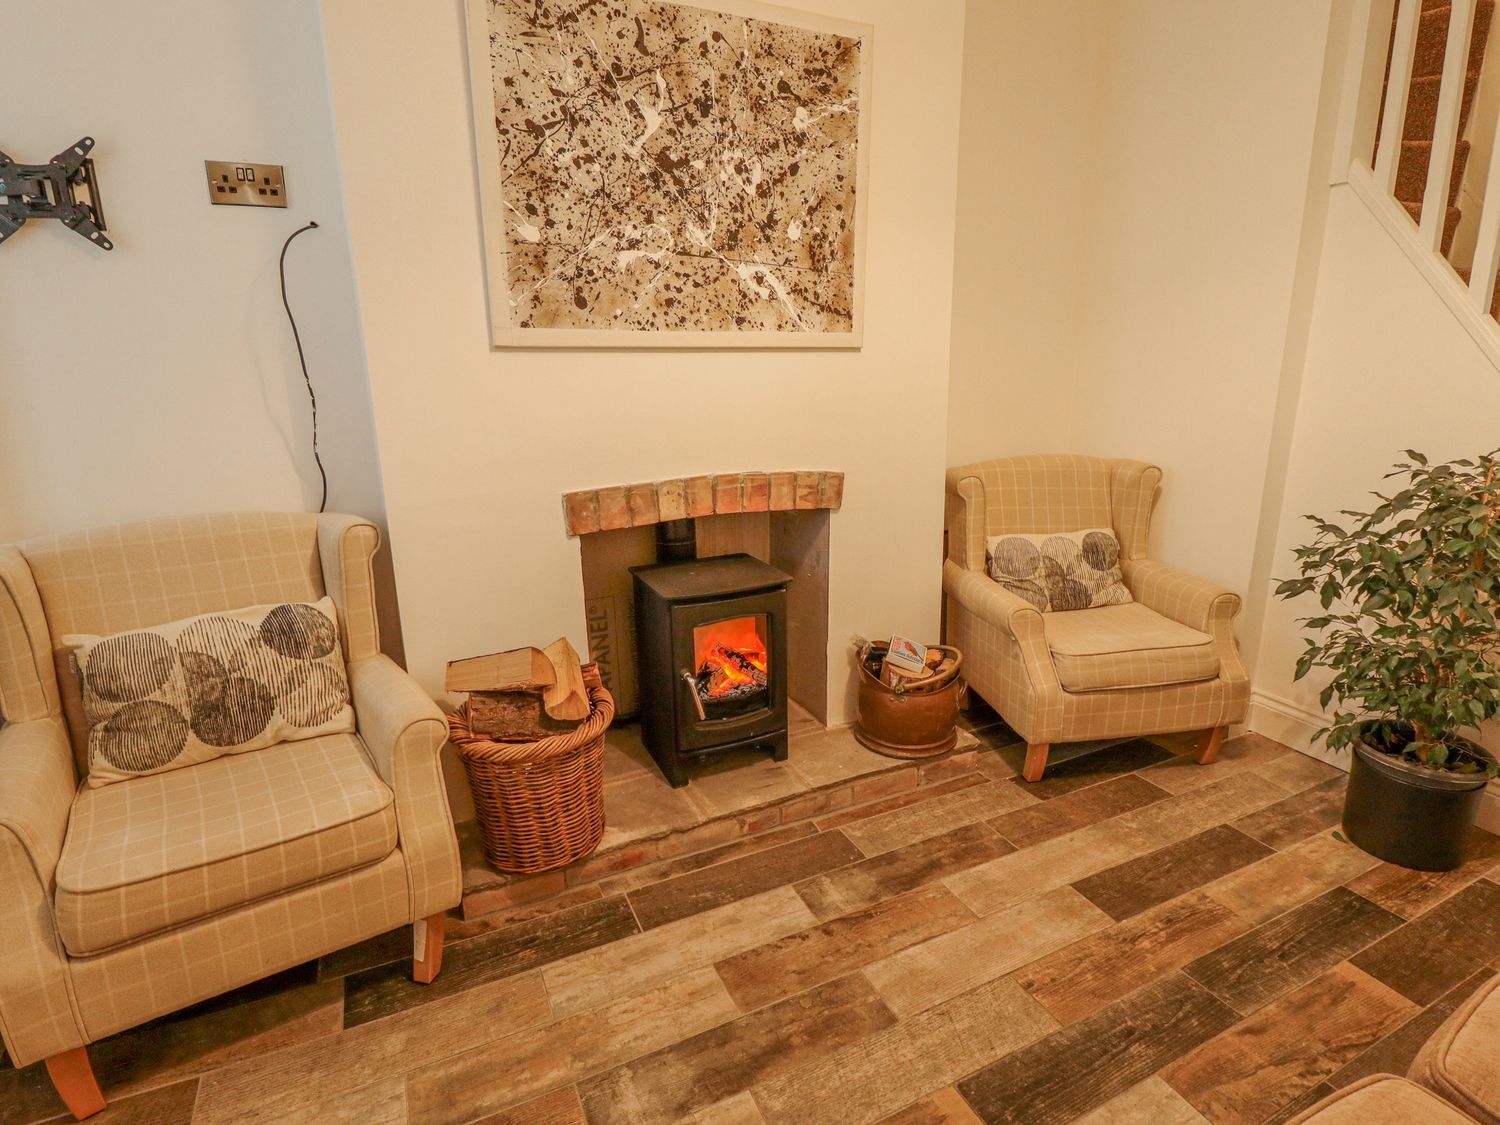 Castle Cottage in Lincoln, Lincolnshire. Three-bedroom home near amenities and attractions. Hot tub.